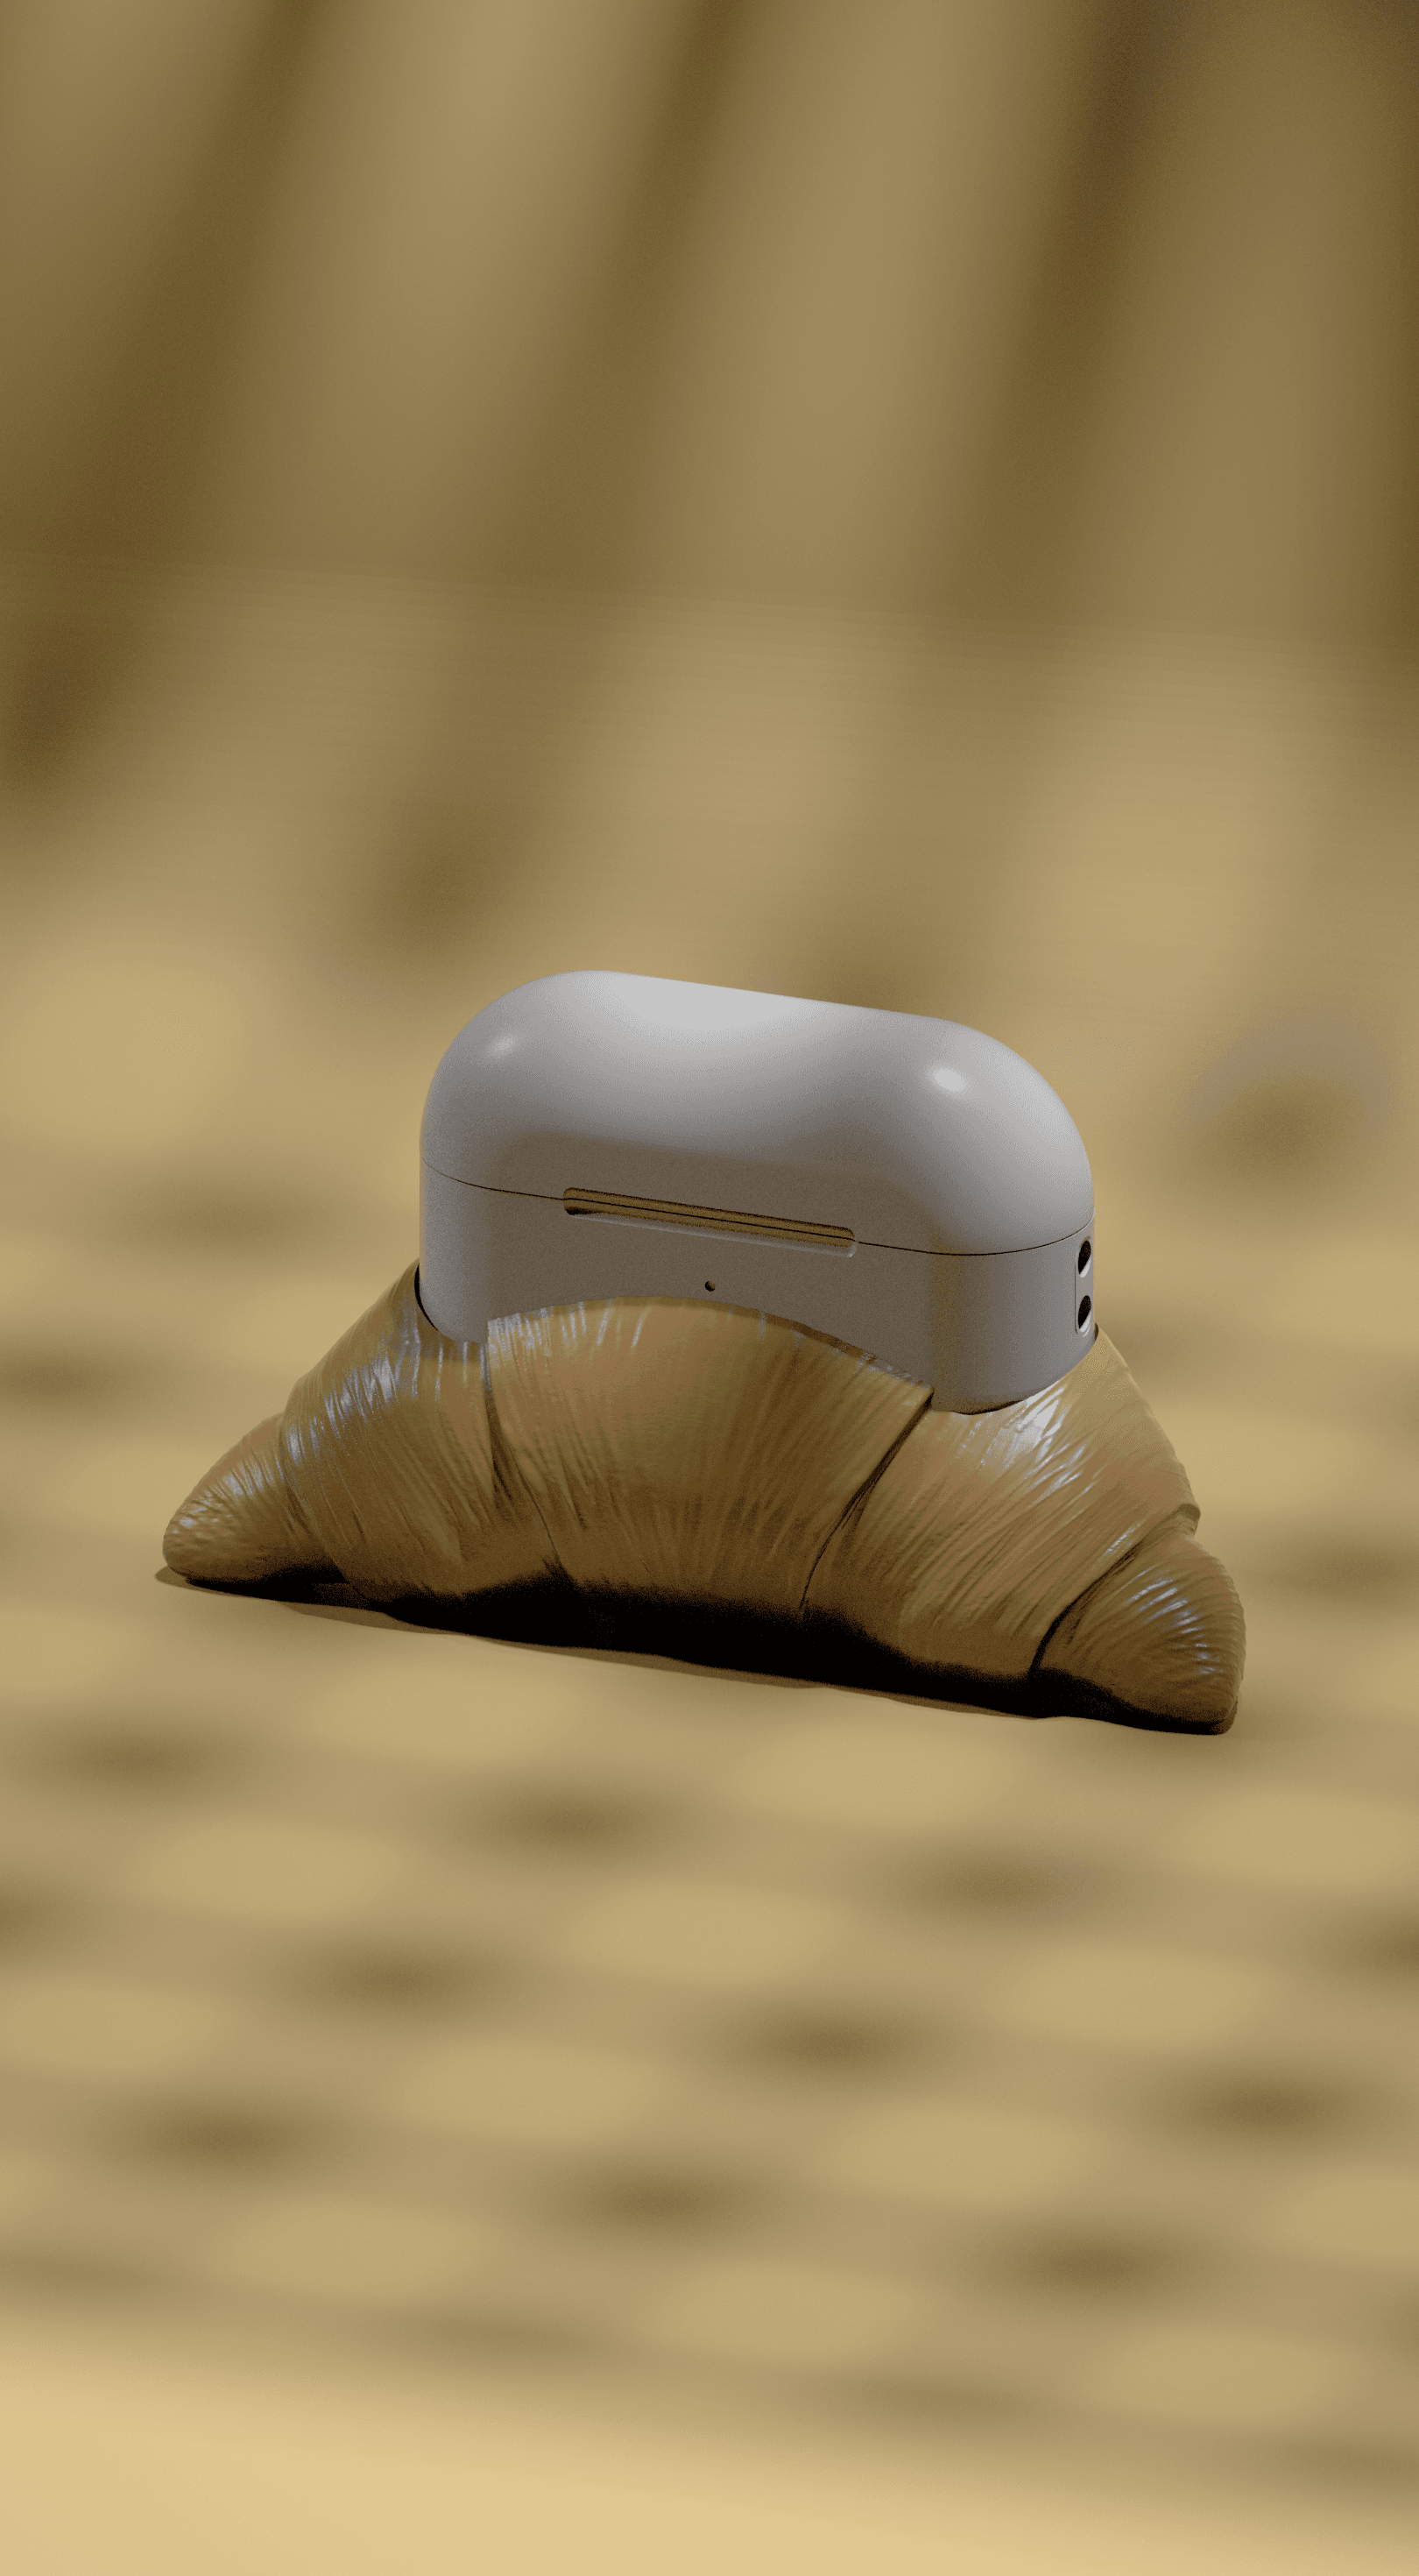 Croissant Airpods Pro 1/2 case/stand 3d model